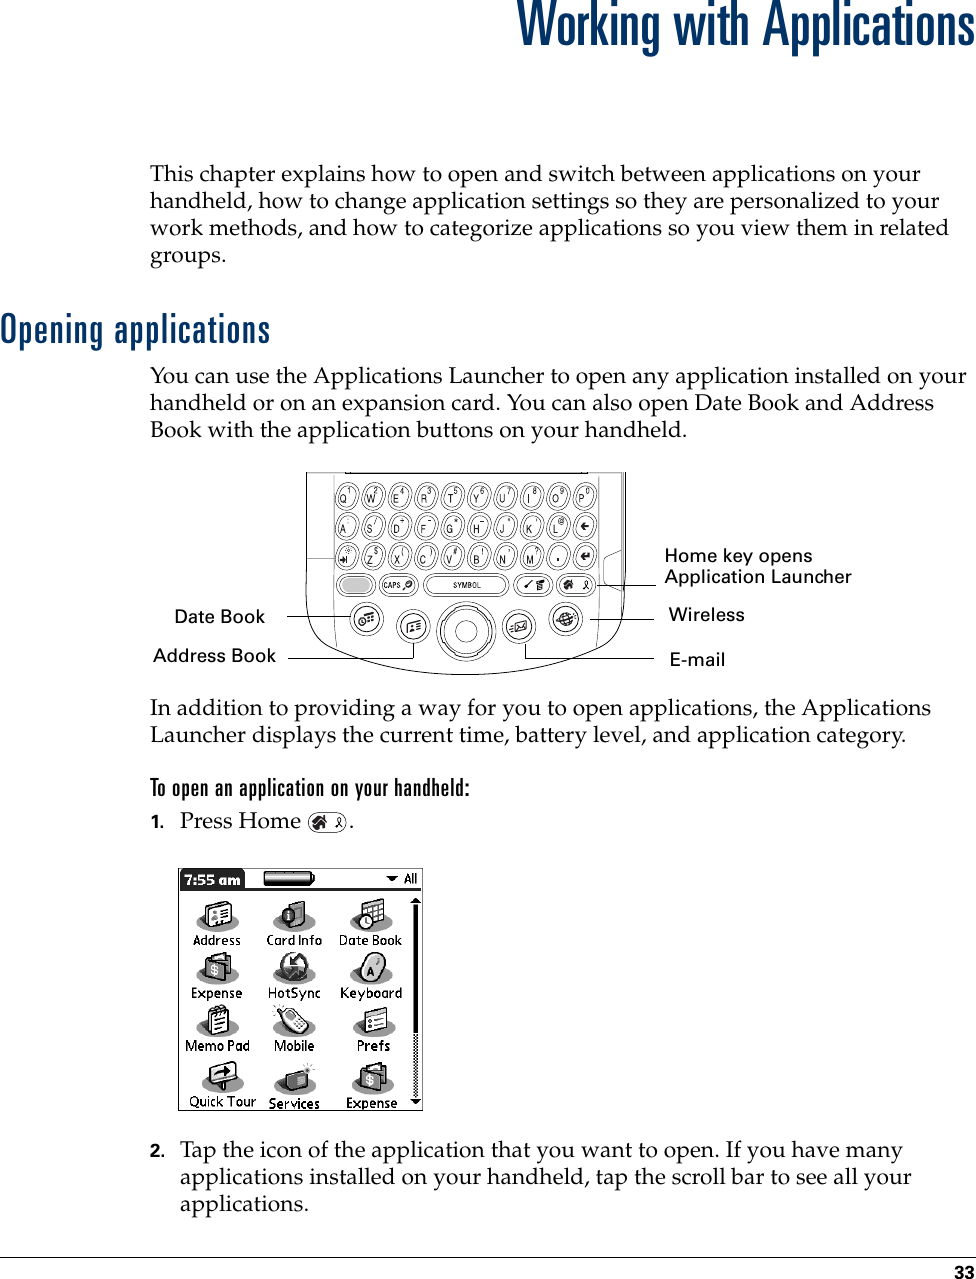 33CHAPTER 4Working with ApplicationsThis chapter explains how to open and switch between applications on your handheld, how to change application settings so they are personalized to your work methods, and how to categorize applications so you view them in related groups.Opening applicationsYou can use the Applications Launcher to open any application installed on your handheld or on an expansion card. You can also open Date Book and Address Book with the application buttons on your handheld.In addition to providing a way for you to open applications, the Applications Launcher displays the current time, battery level, and application category. To open an application on your handheld:1. Press Home  . 2. Tap the icon of the application that you want to open. If you have many applications installed on your handheld, tap the scroll bar to see all your applications. Home key opens Application LauncherAddress BookDate BookE-mailWirelessPalm, Inc. Confidential